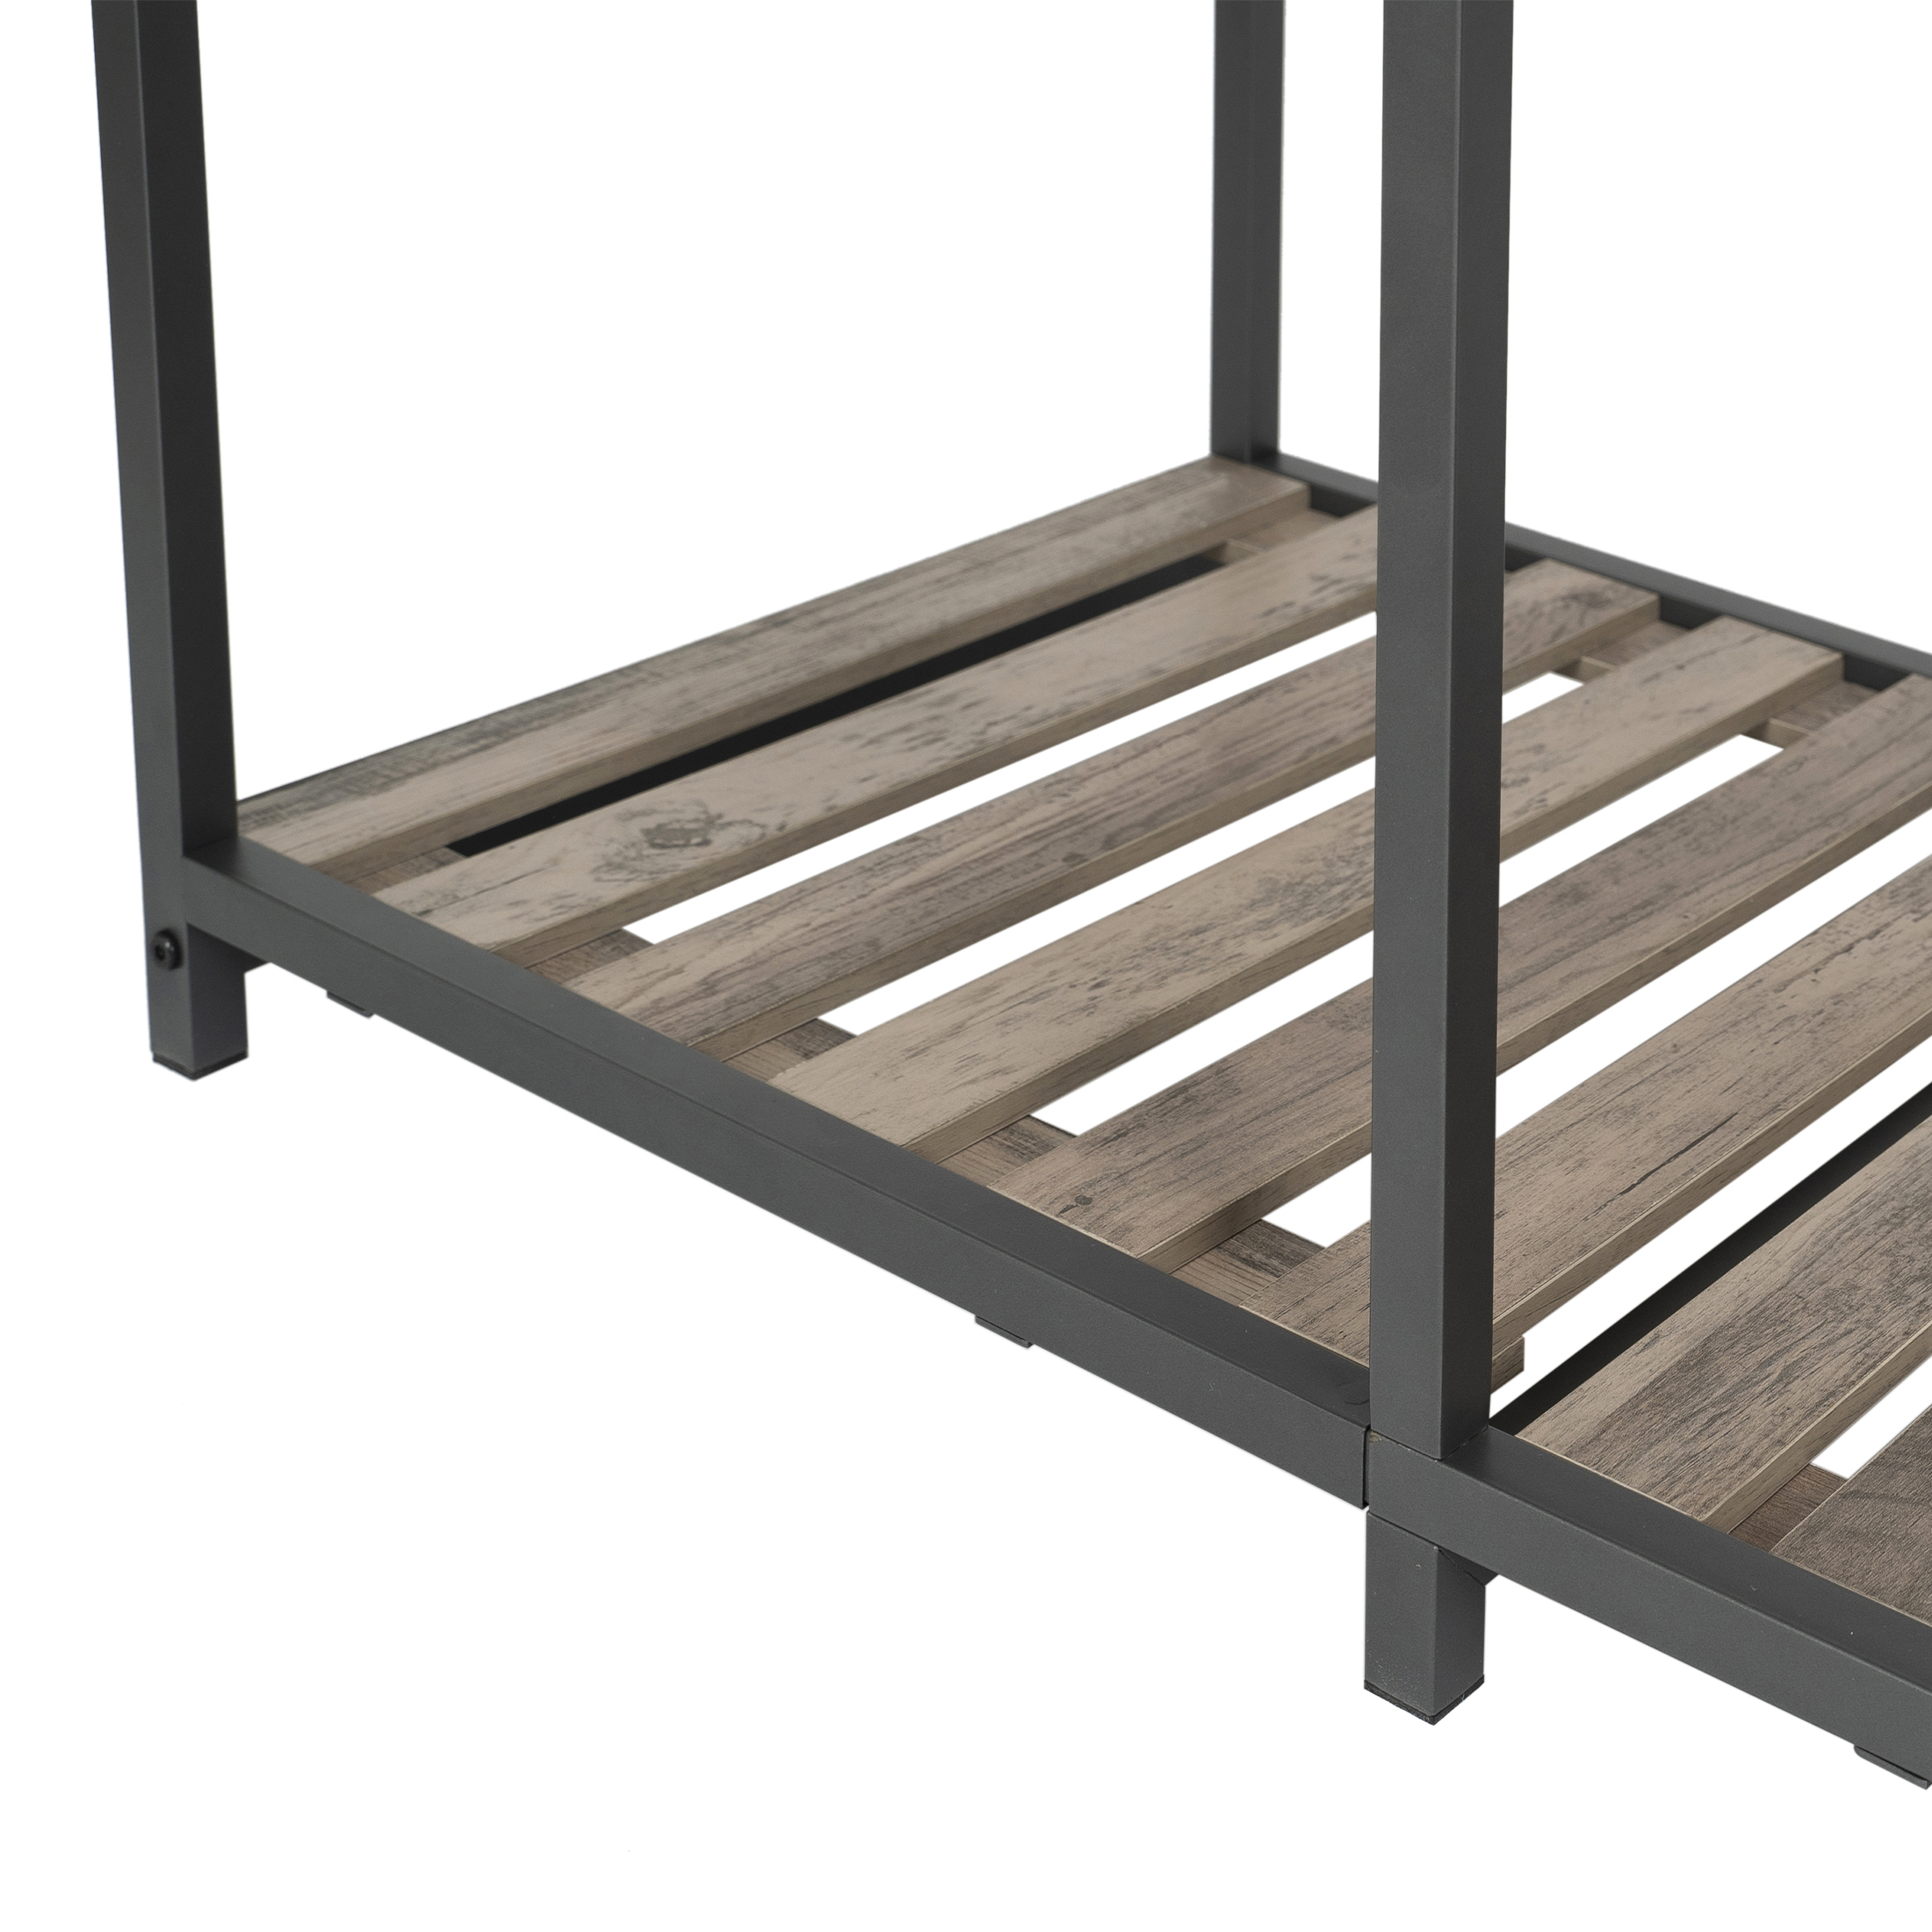 Better Homes & Gardens Farmhouse Gray Wood and Metal Garment Rack - image 3 of 7